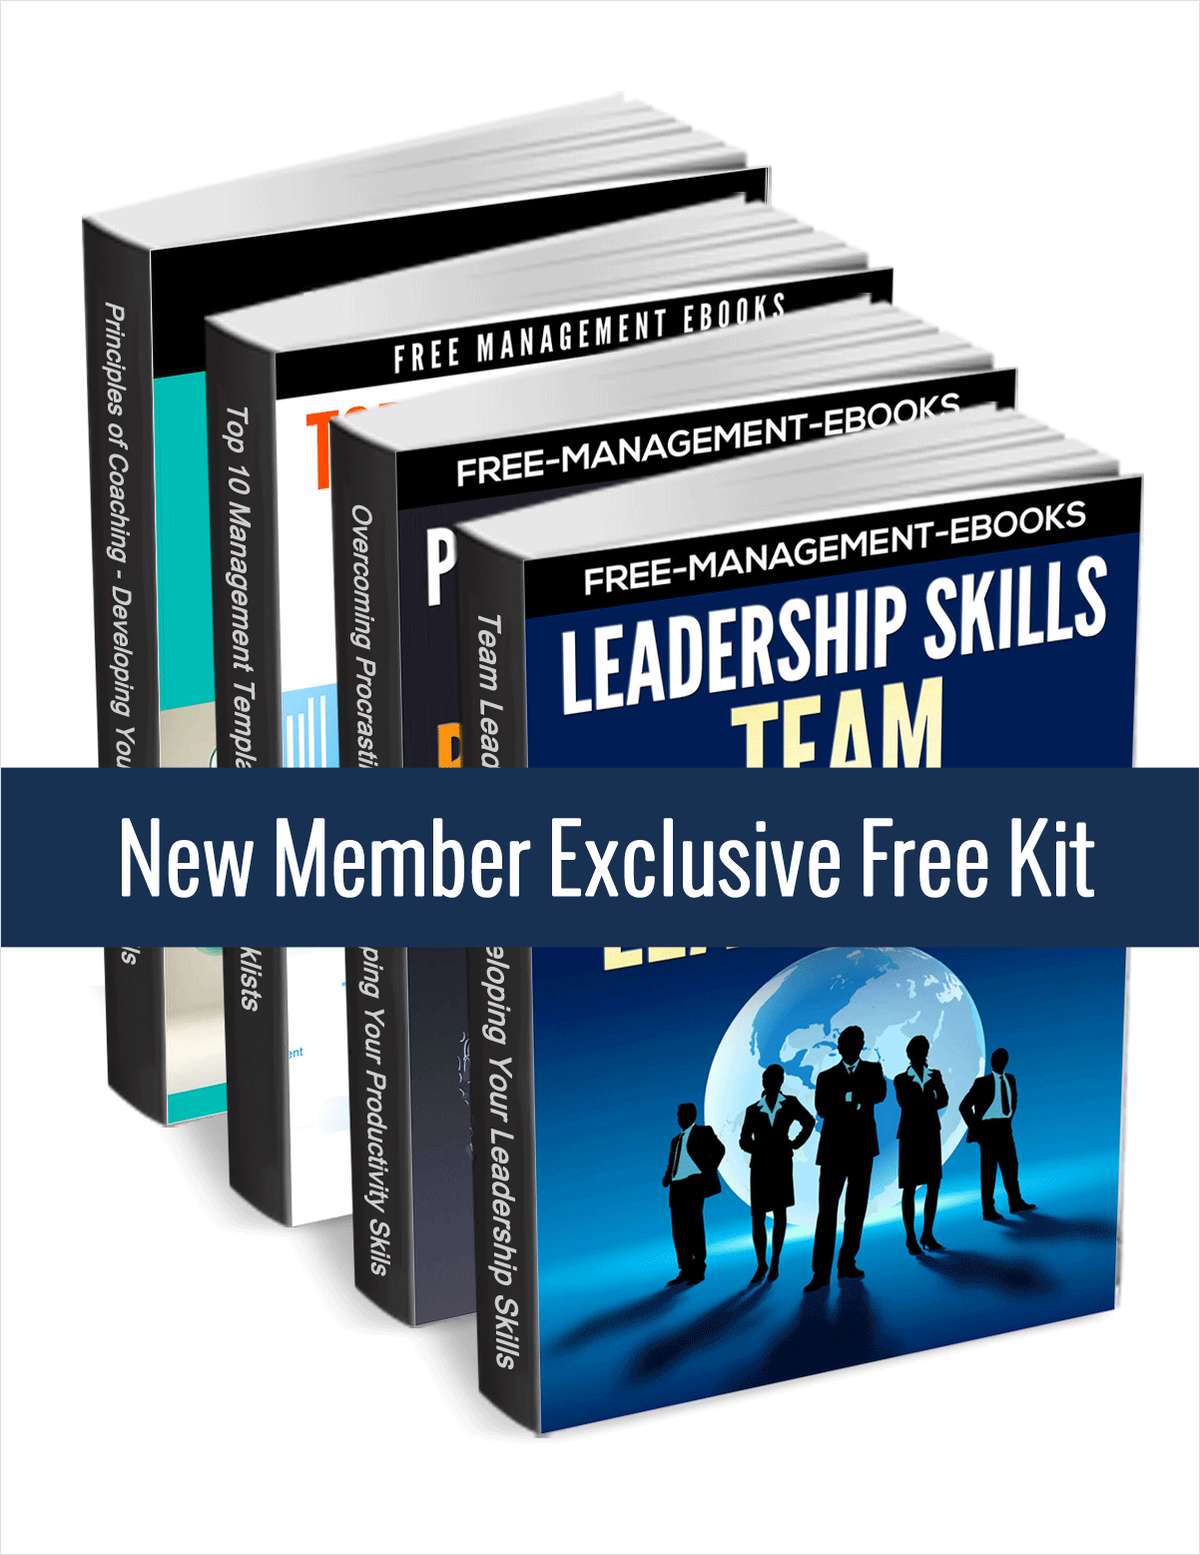 New Member Exclusive: Join TradePub.com Now and Receive a Free 'Professional Development Kit'